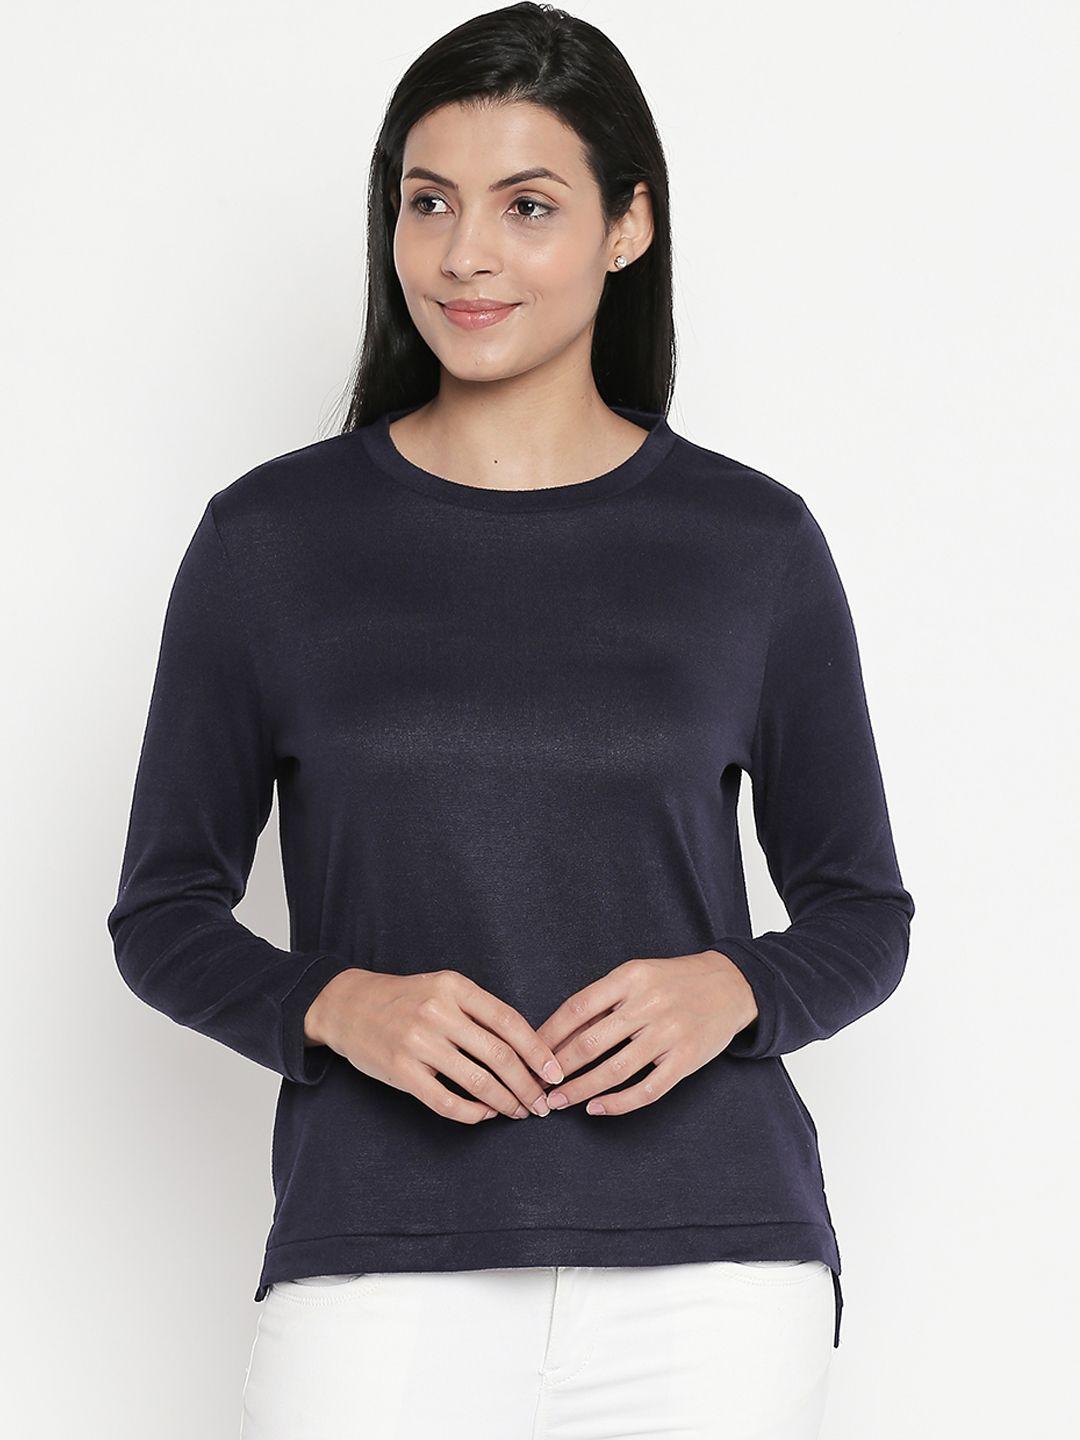 honey-by-pantaloons-women-navy-blue-solid-round-neck-t-shirt